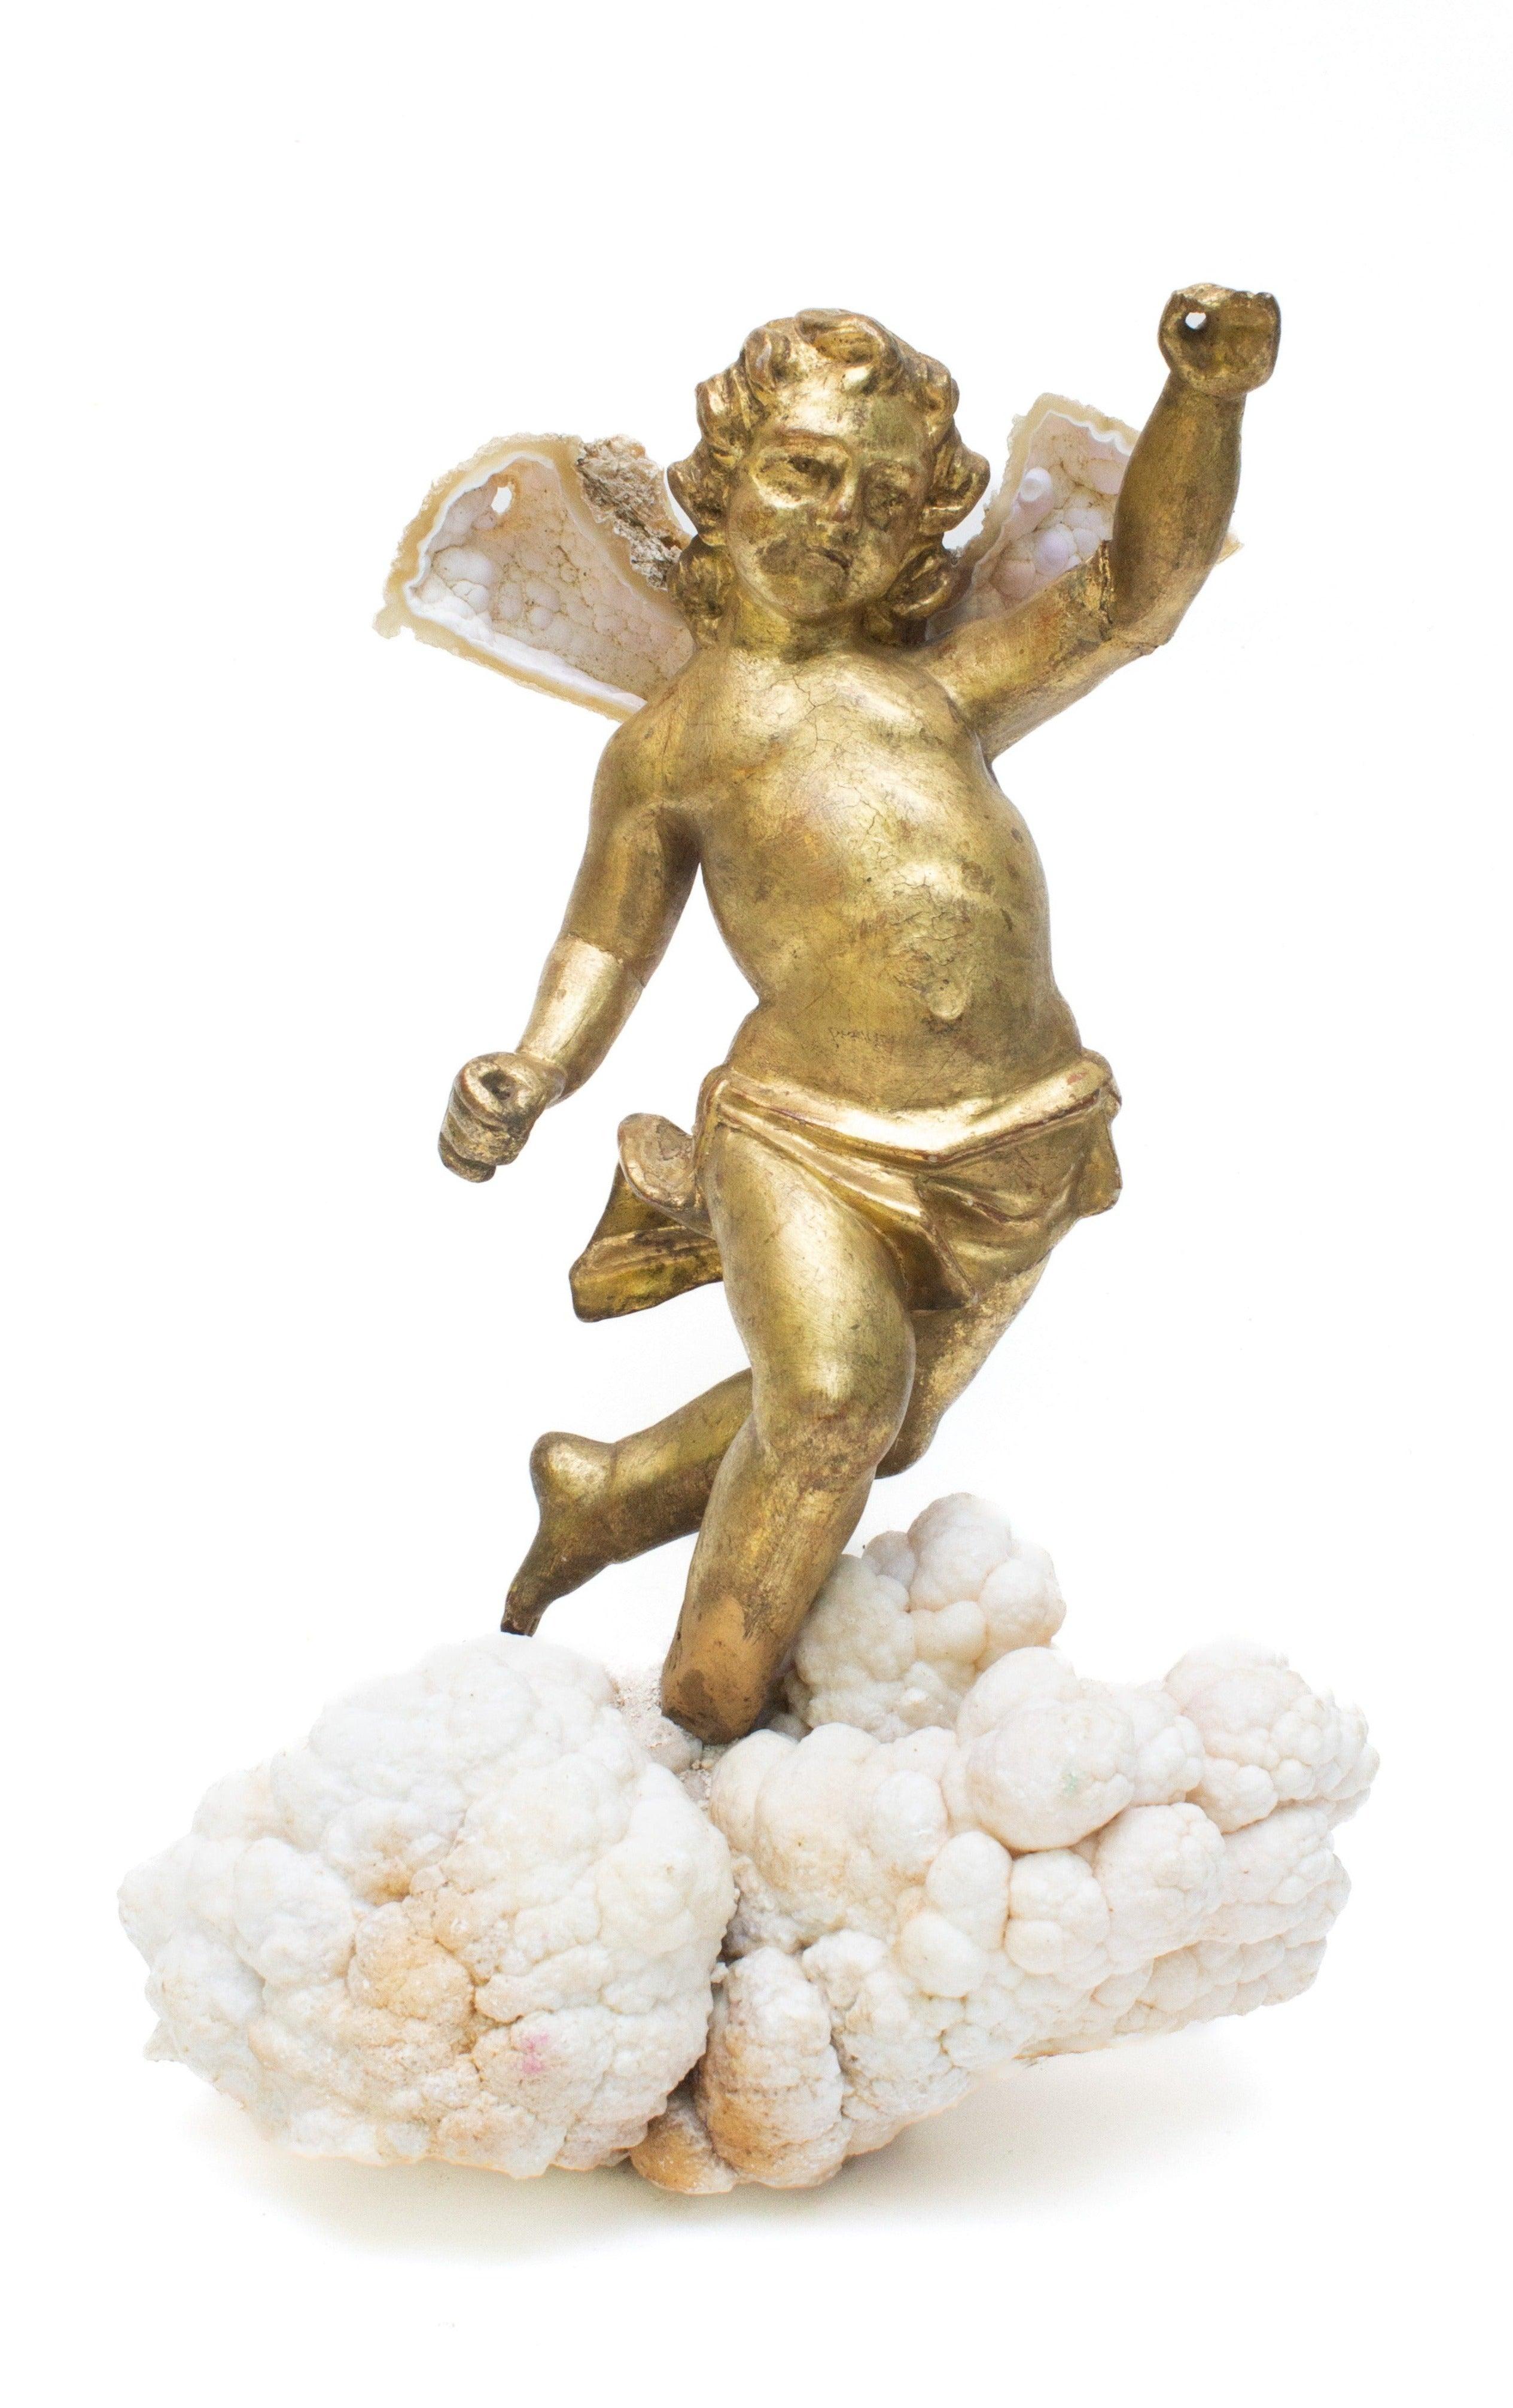 18th century Italian hand-carved gold leaf angel with fossil agate coral wings and mounted aragonite. 

The hand-carved angel was once part of a decorative, angelic depiction in a historic church in Tuscany. The piece is adorned with the fossil